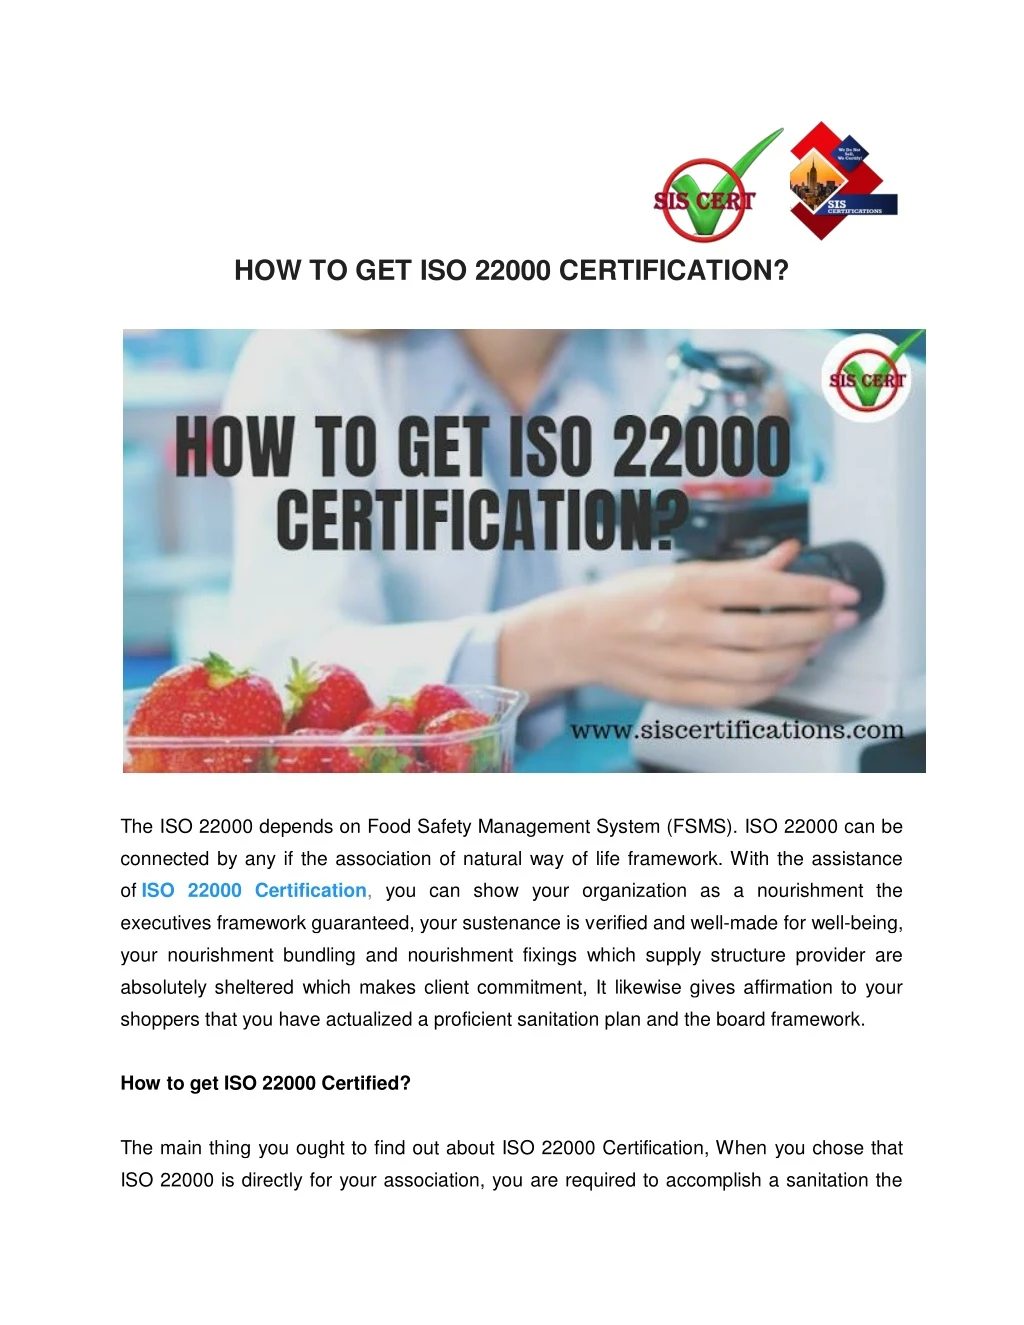 how to get iso 22000 certification